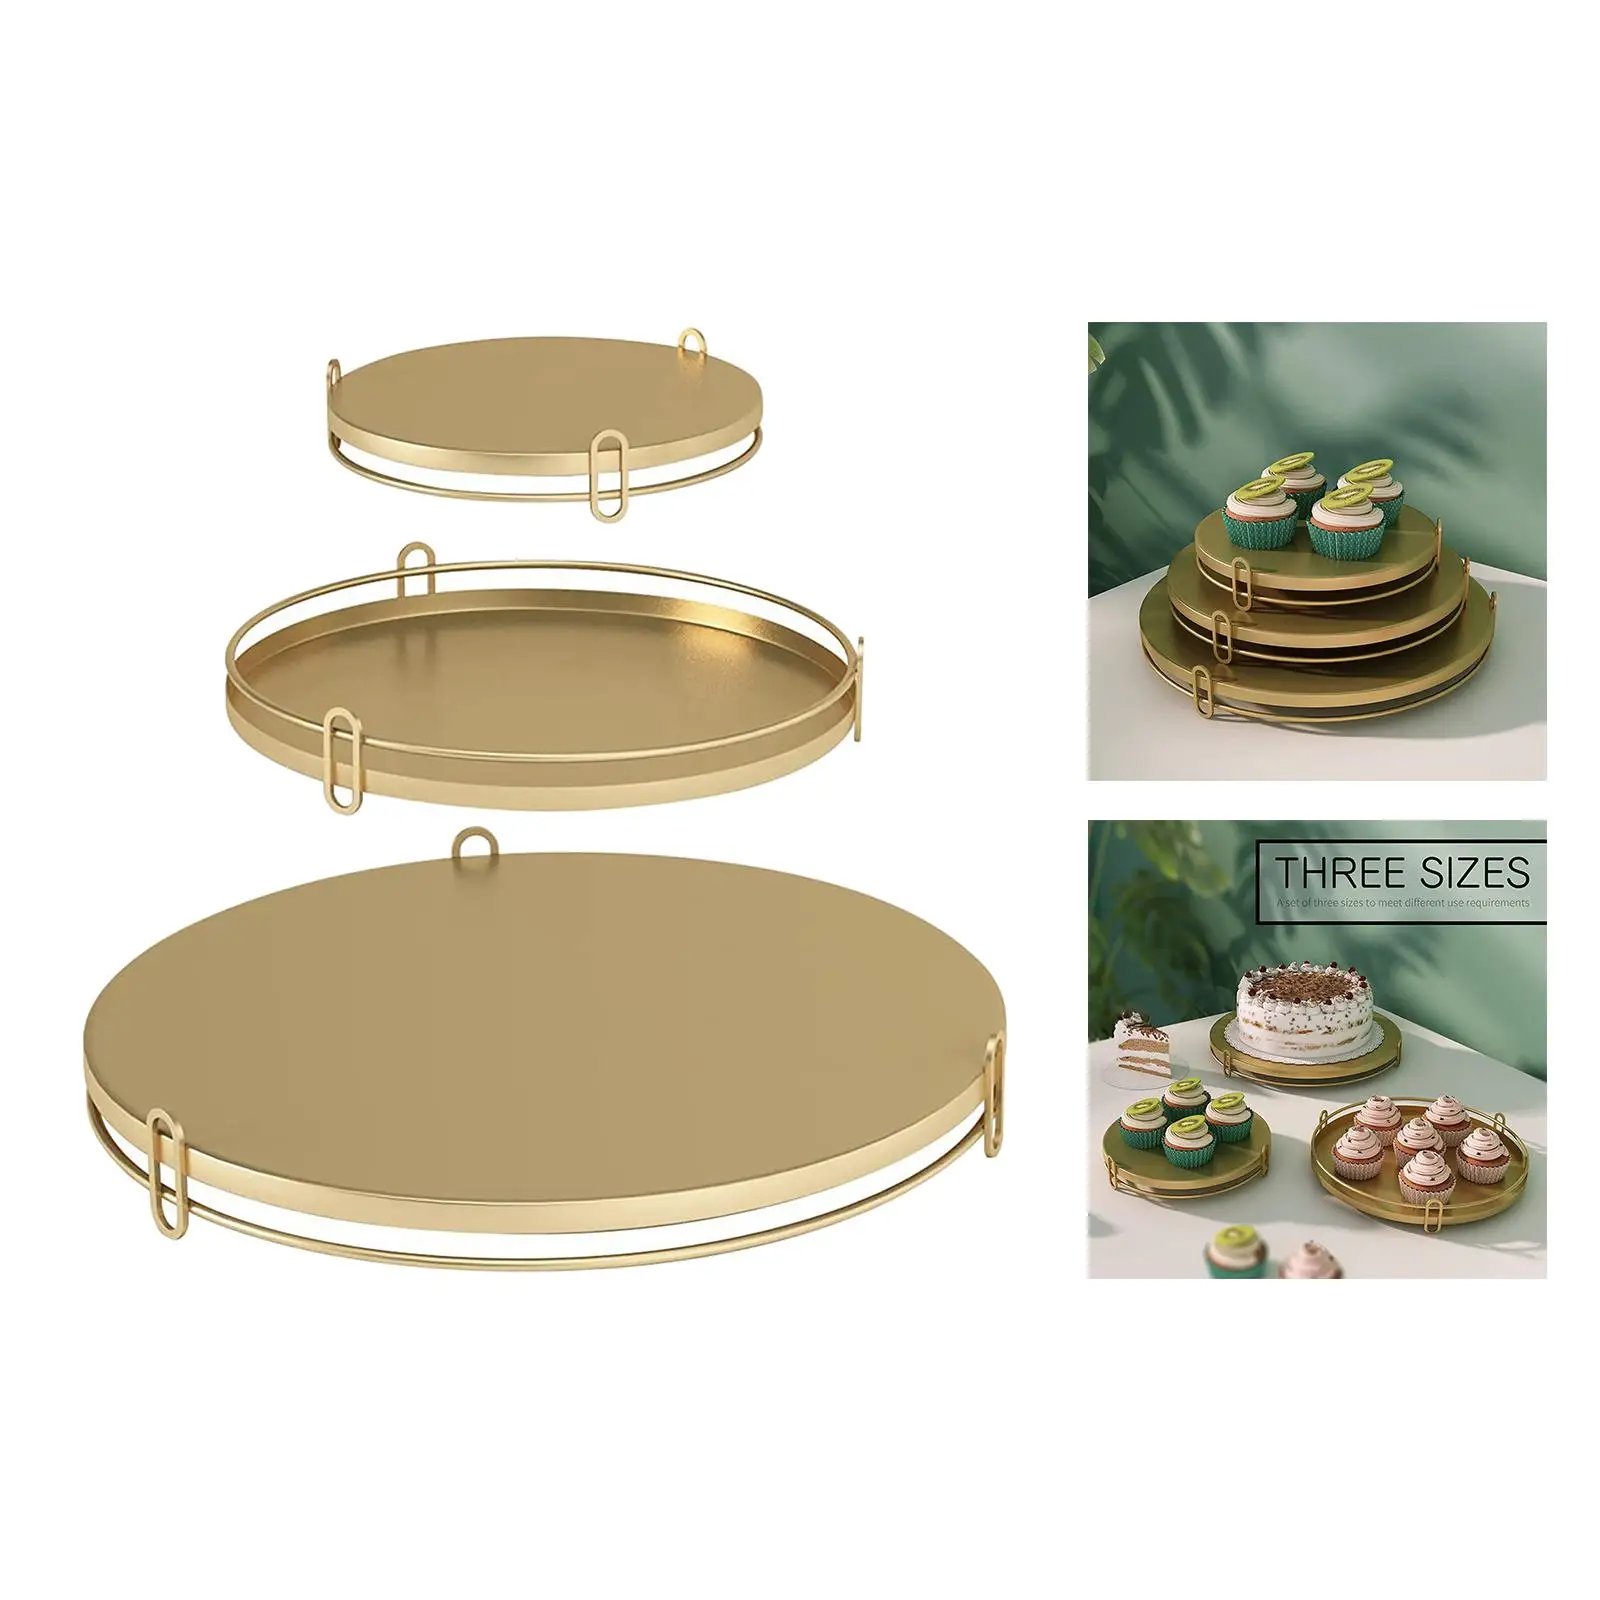 Pack of 3 Count Golden Dessert Stand Cupcake Stand for Home Decorating Variety of Uses Cosmetic Organizer Elegant Fruit Plate